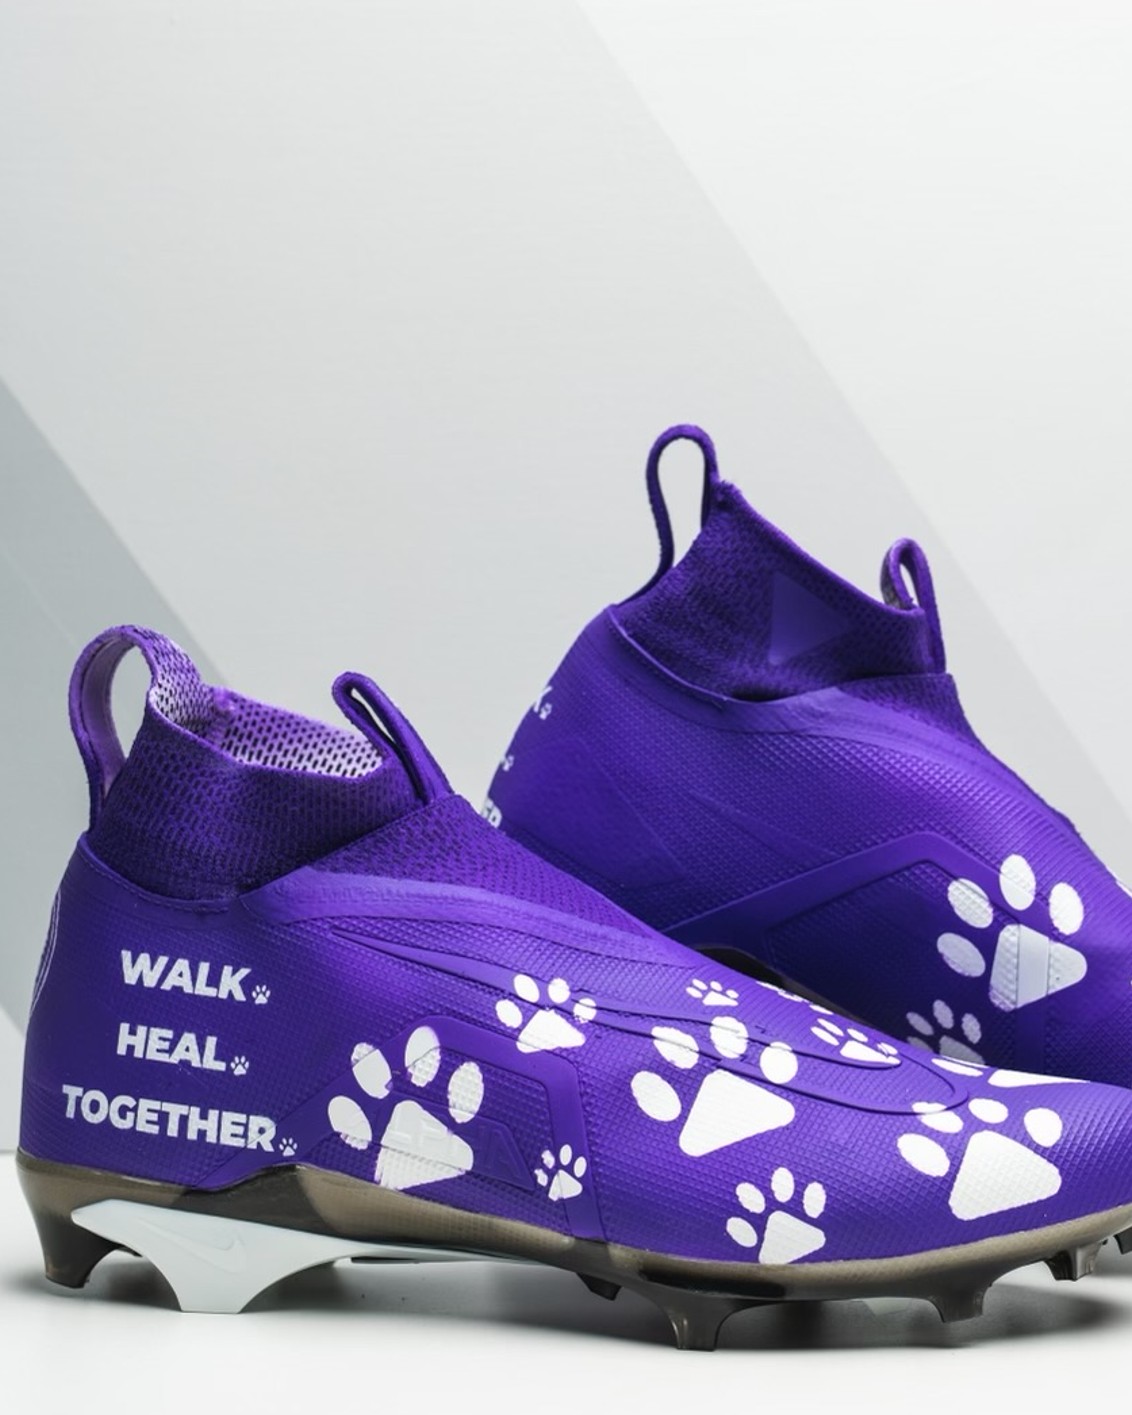 James Smith-Williams custom-designed cleats highlighting the Purple Leash Project